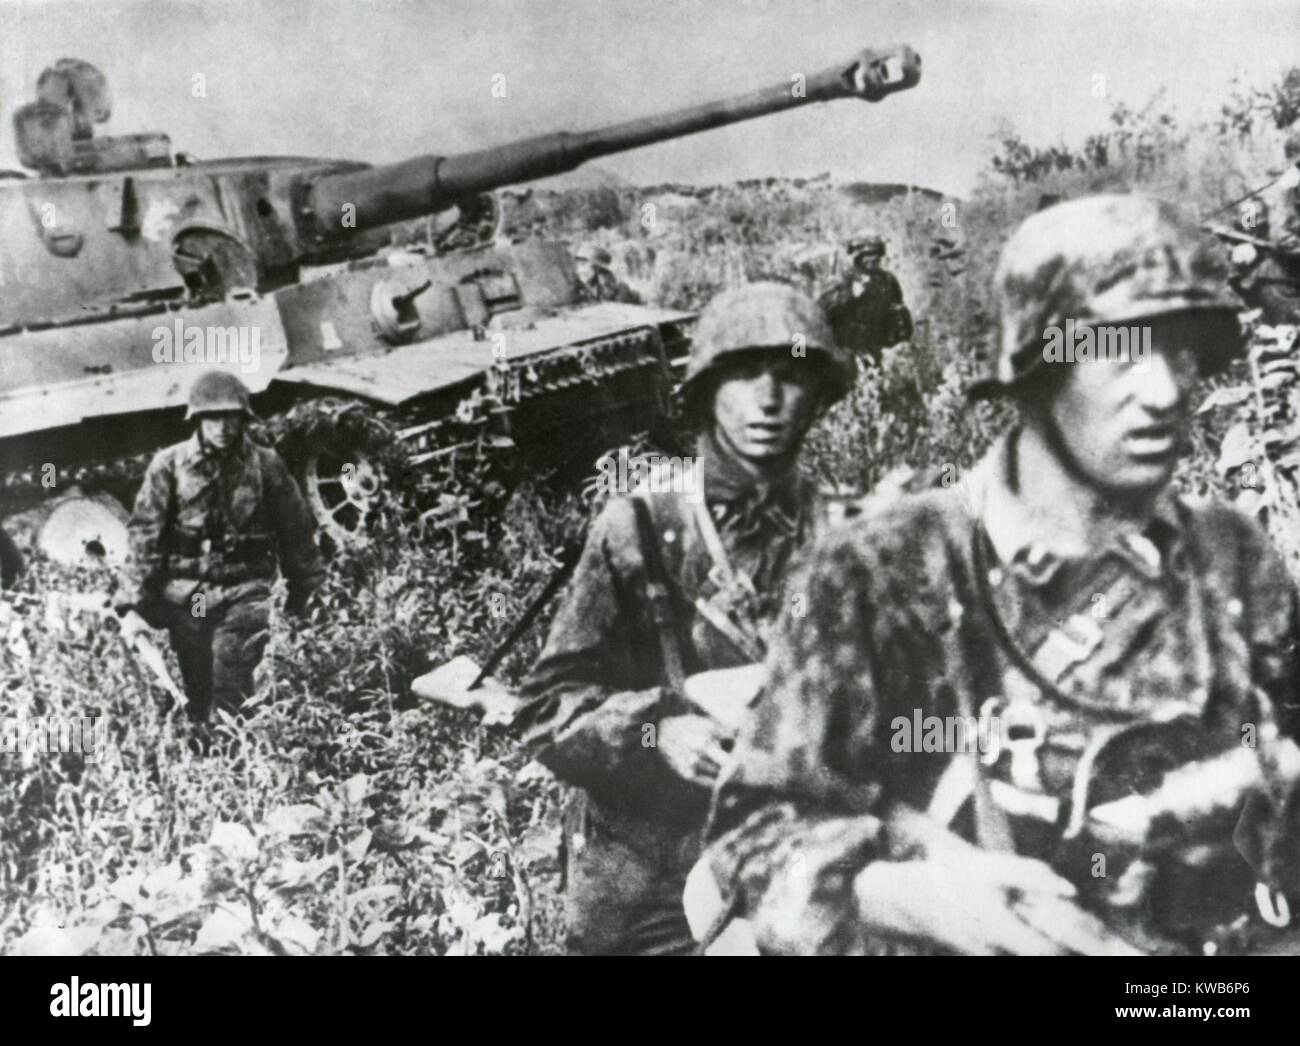 German Infantry in camouflaged clothing retreating with a tank on the Kuban Front. German troops held the Kuban position after retreating from the Caspian oil fields, retreated further to the Crimean peninsula in Oct. 1942. World War 2. (BSLOC 2014 8 22) Stock Photo